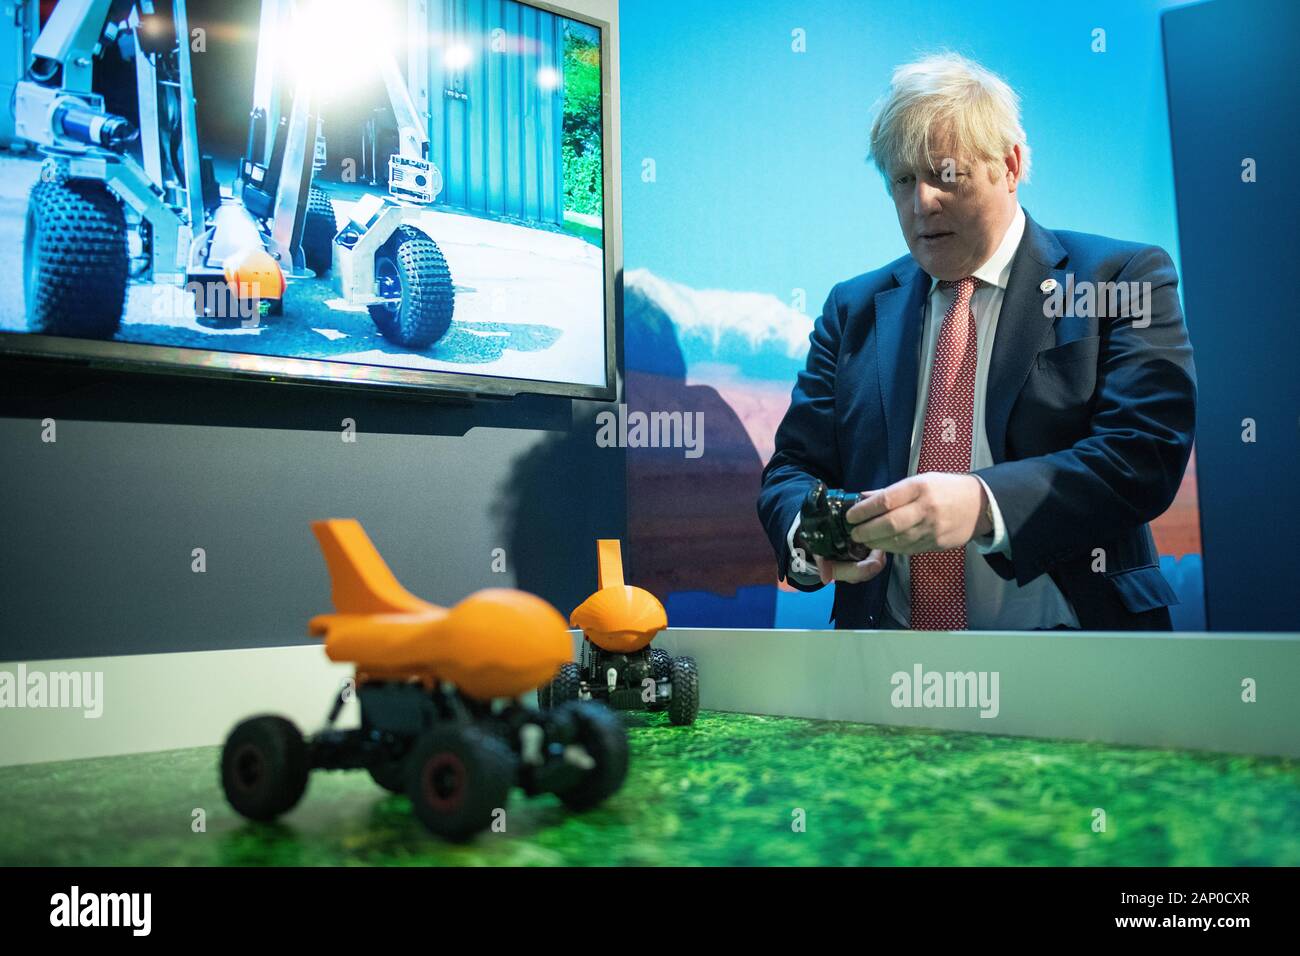 Prime Minister Boris Johnson visits the "Small Robot Company" stand at the  Innovation Zone during the UK-Africa Investment Summit at the  Intercontinental Hotel London Stock Photo - Alamy